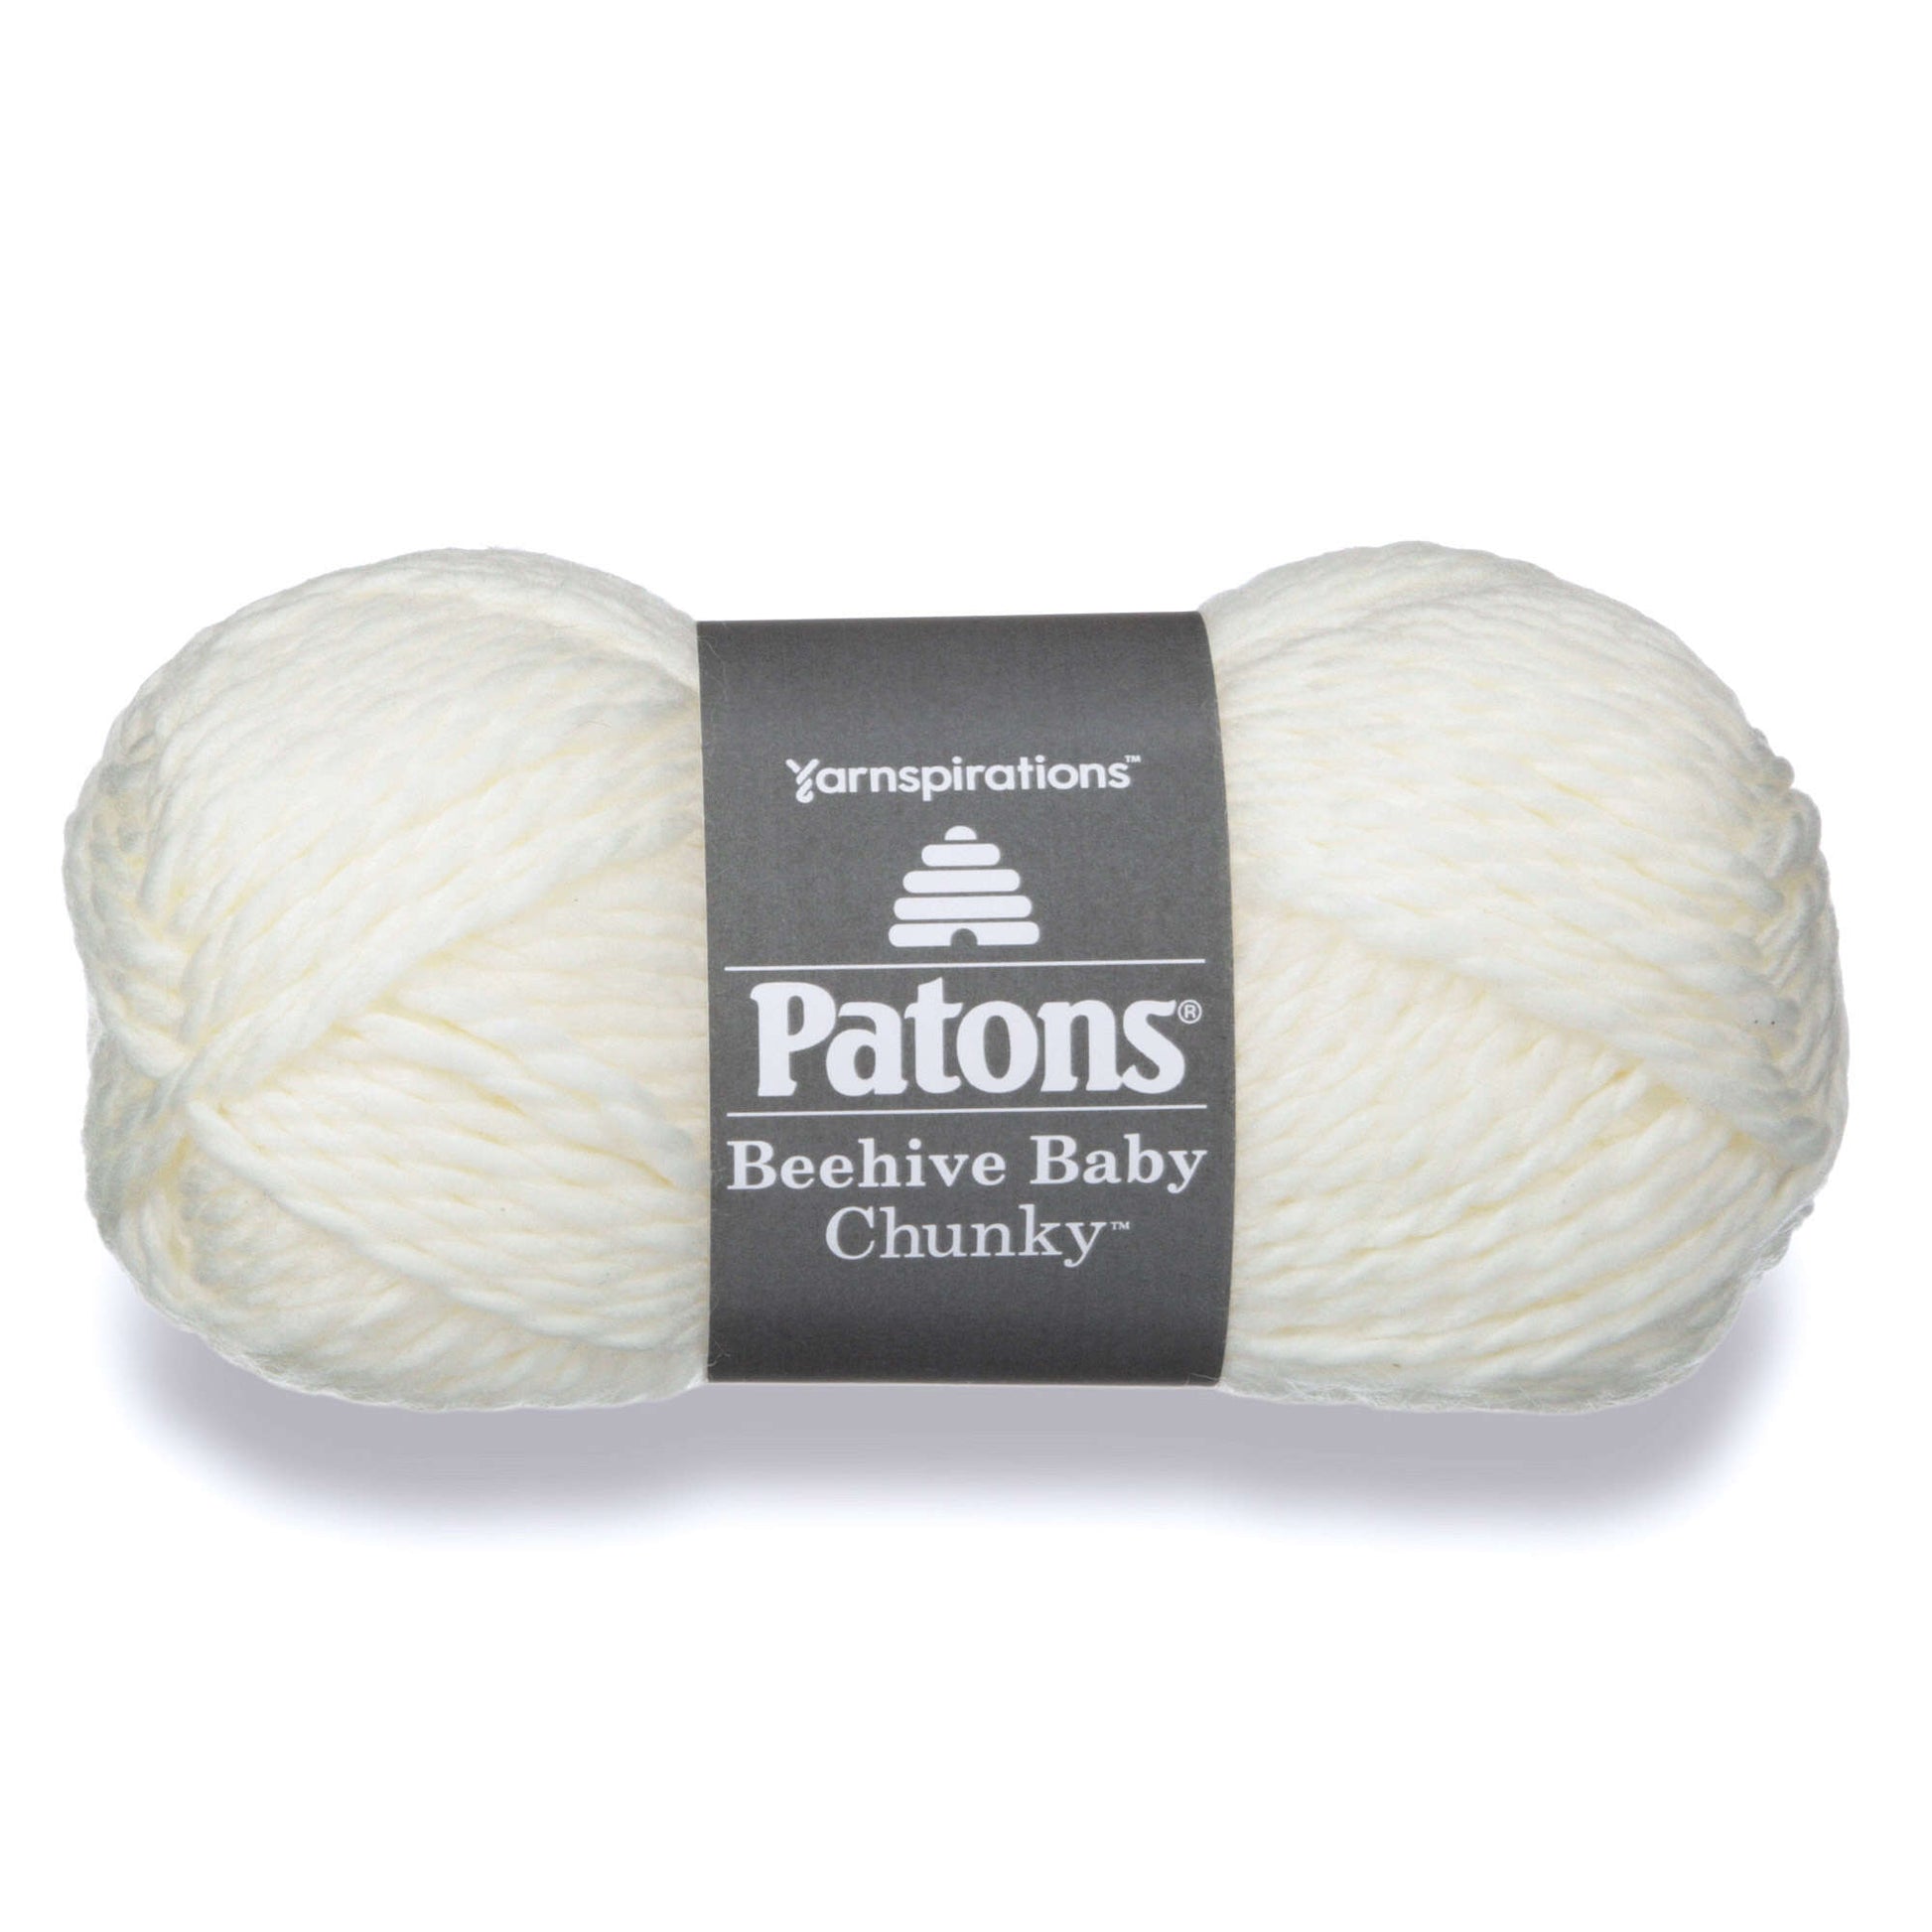 Patons Beehive Baby Chunky Yarn - Discontinued Shades Lushest Lace